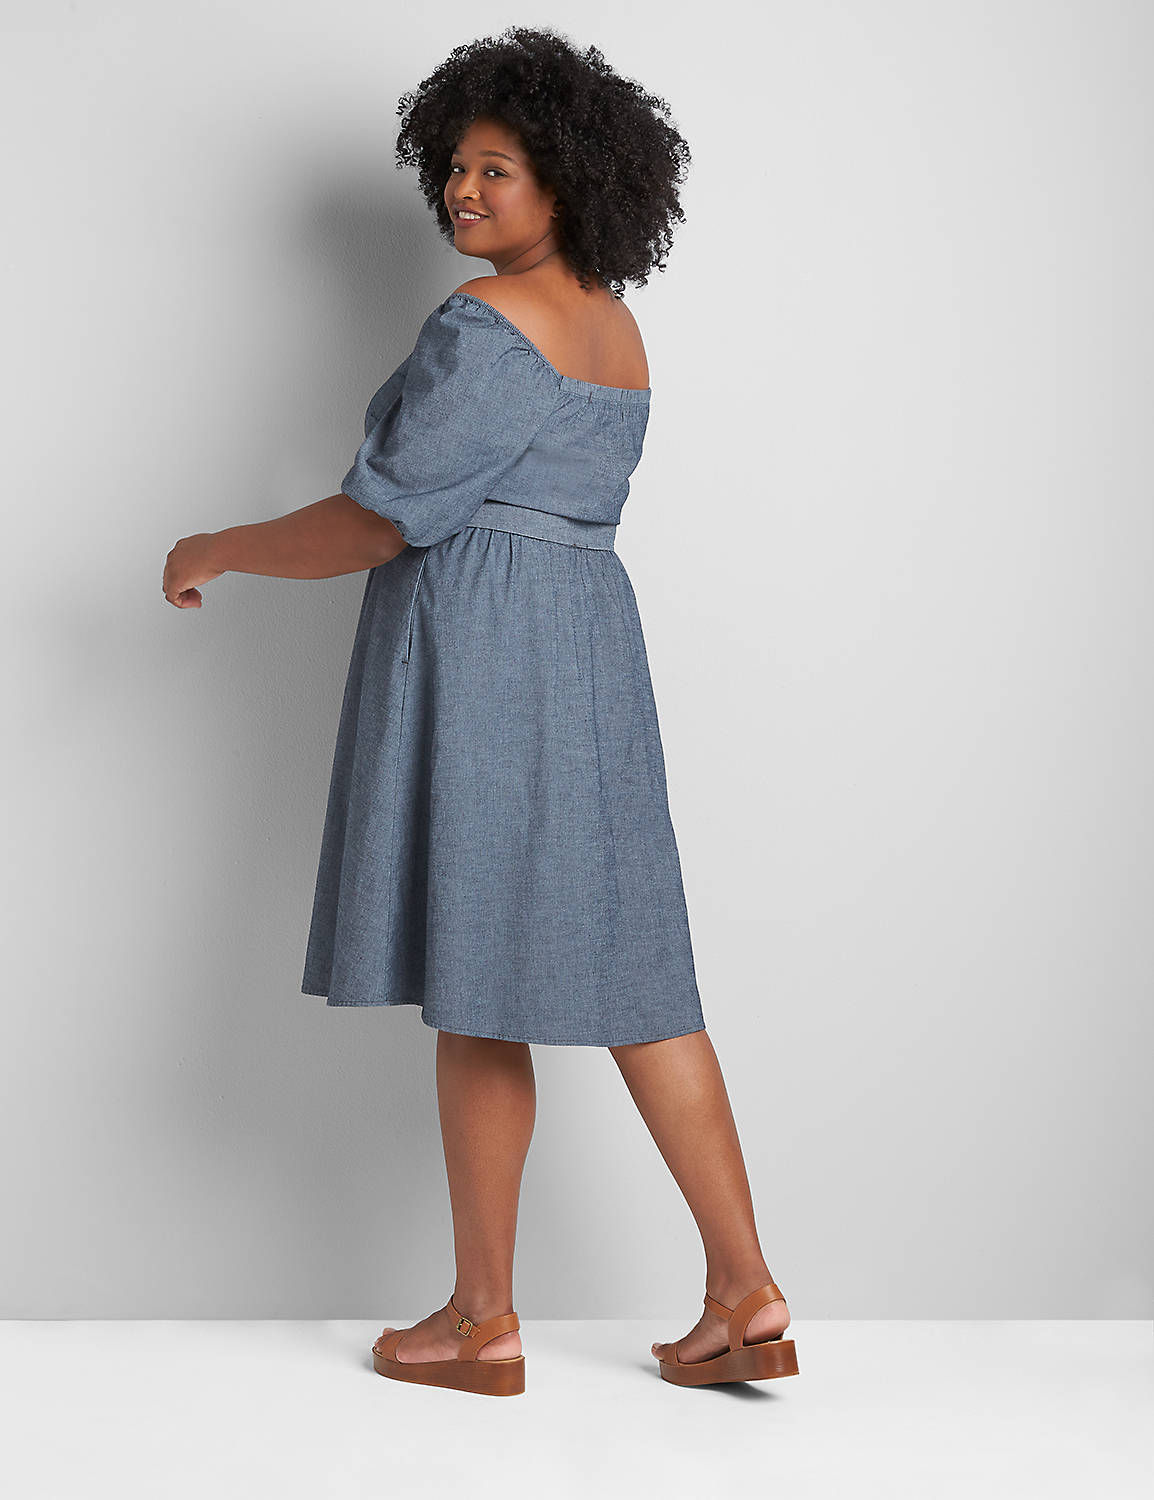 Elbow Sleeve Square Neck Button Front Chambray Midi 1121719:Chambray:16 Product Image 2